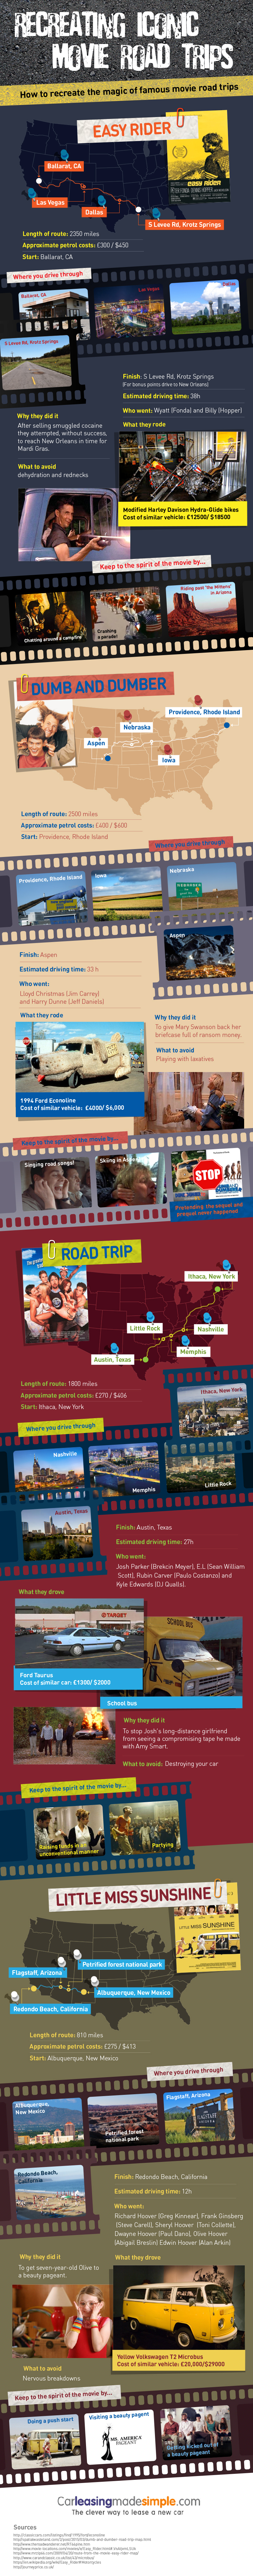 Make Your Next Adventure Memorable By Recreating Movie Road Trips